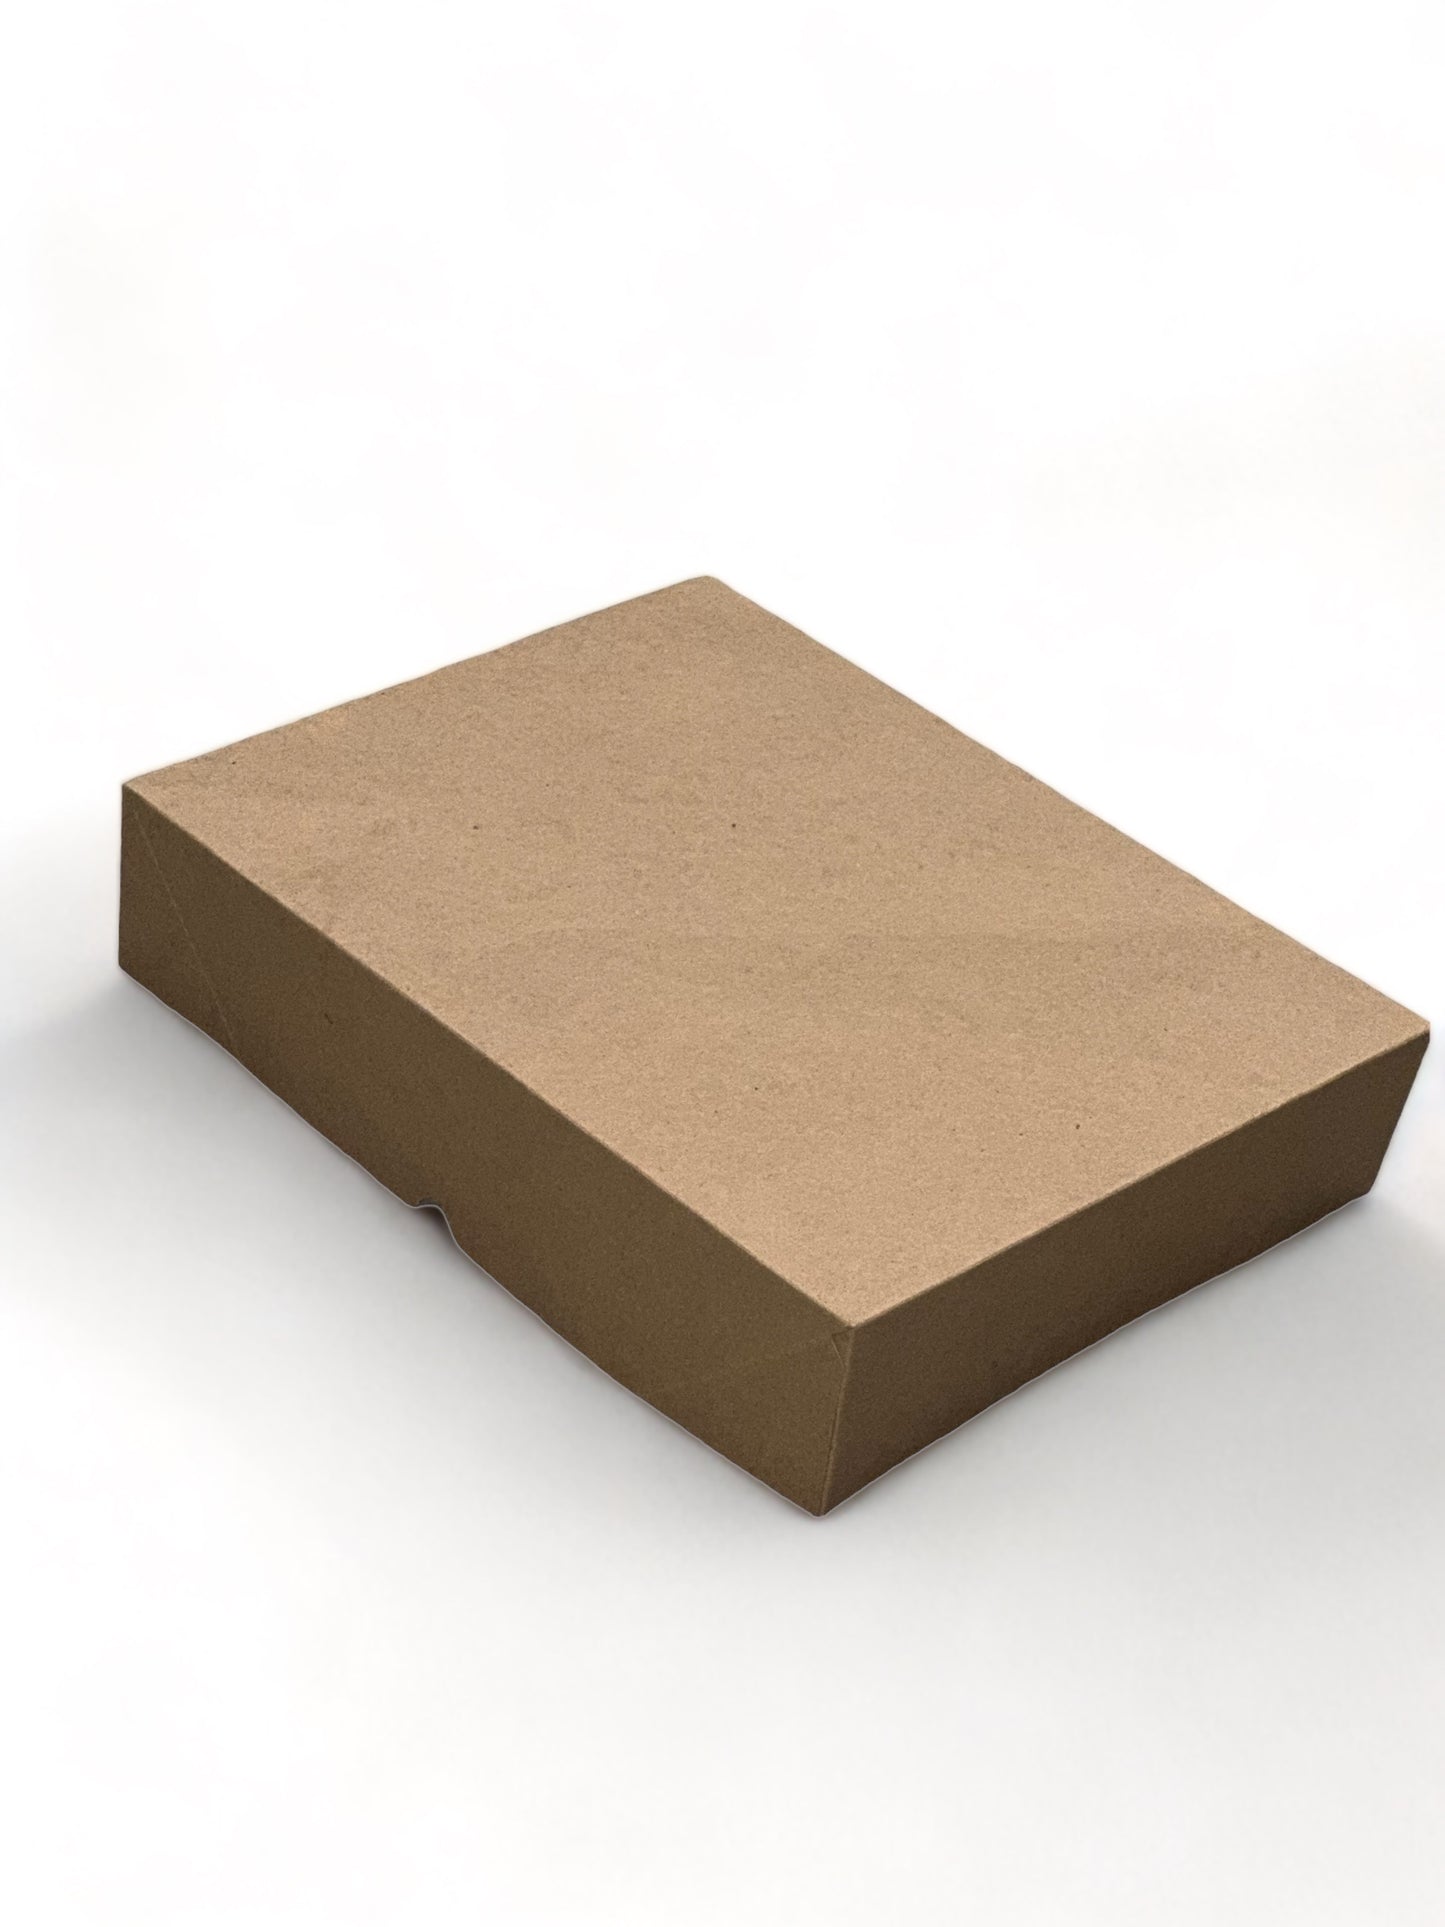 Donut/Muffin Top Box - 16.5X12.5X3.5 - 200 Pieces